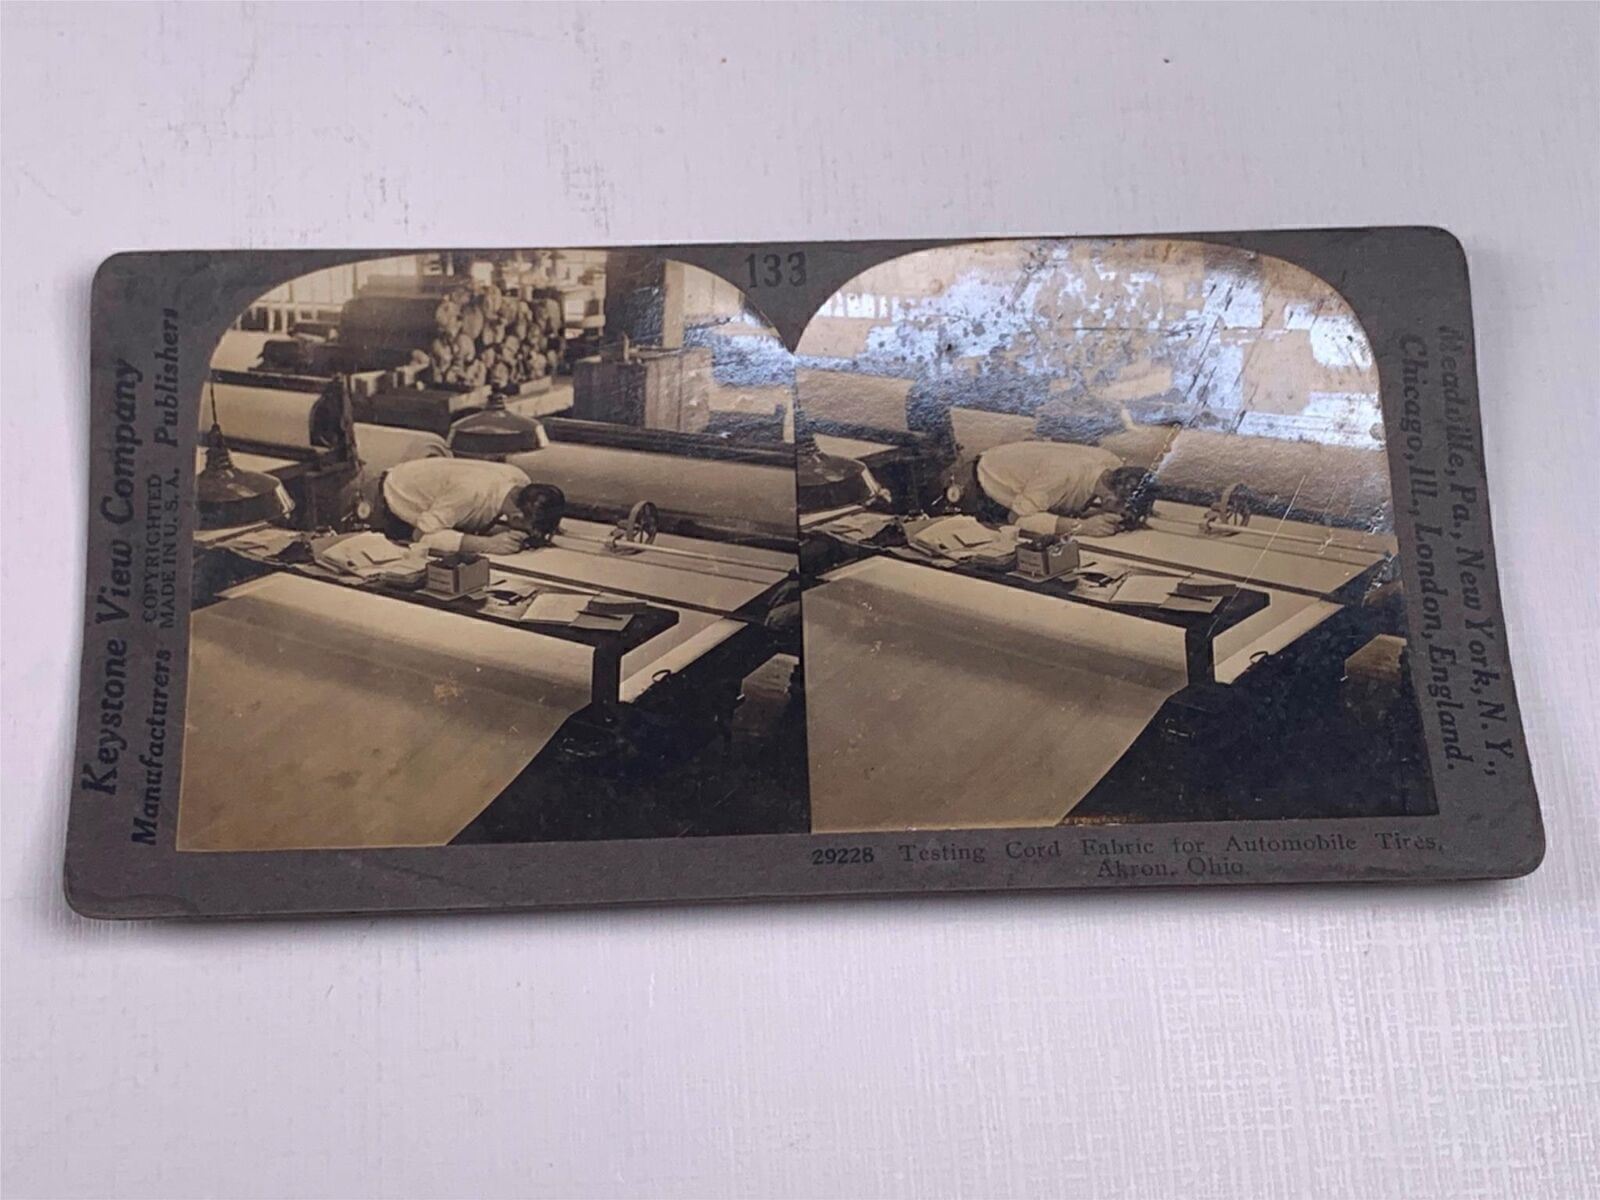 Keystone Stereoview Photo Testing Cord Fabric Automobile Tires Akron OH 